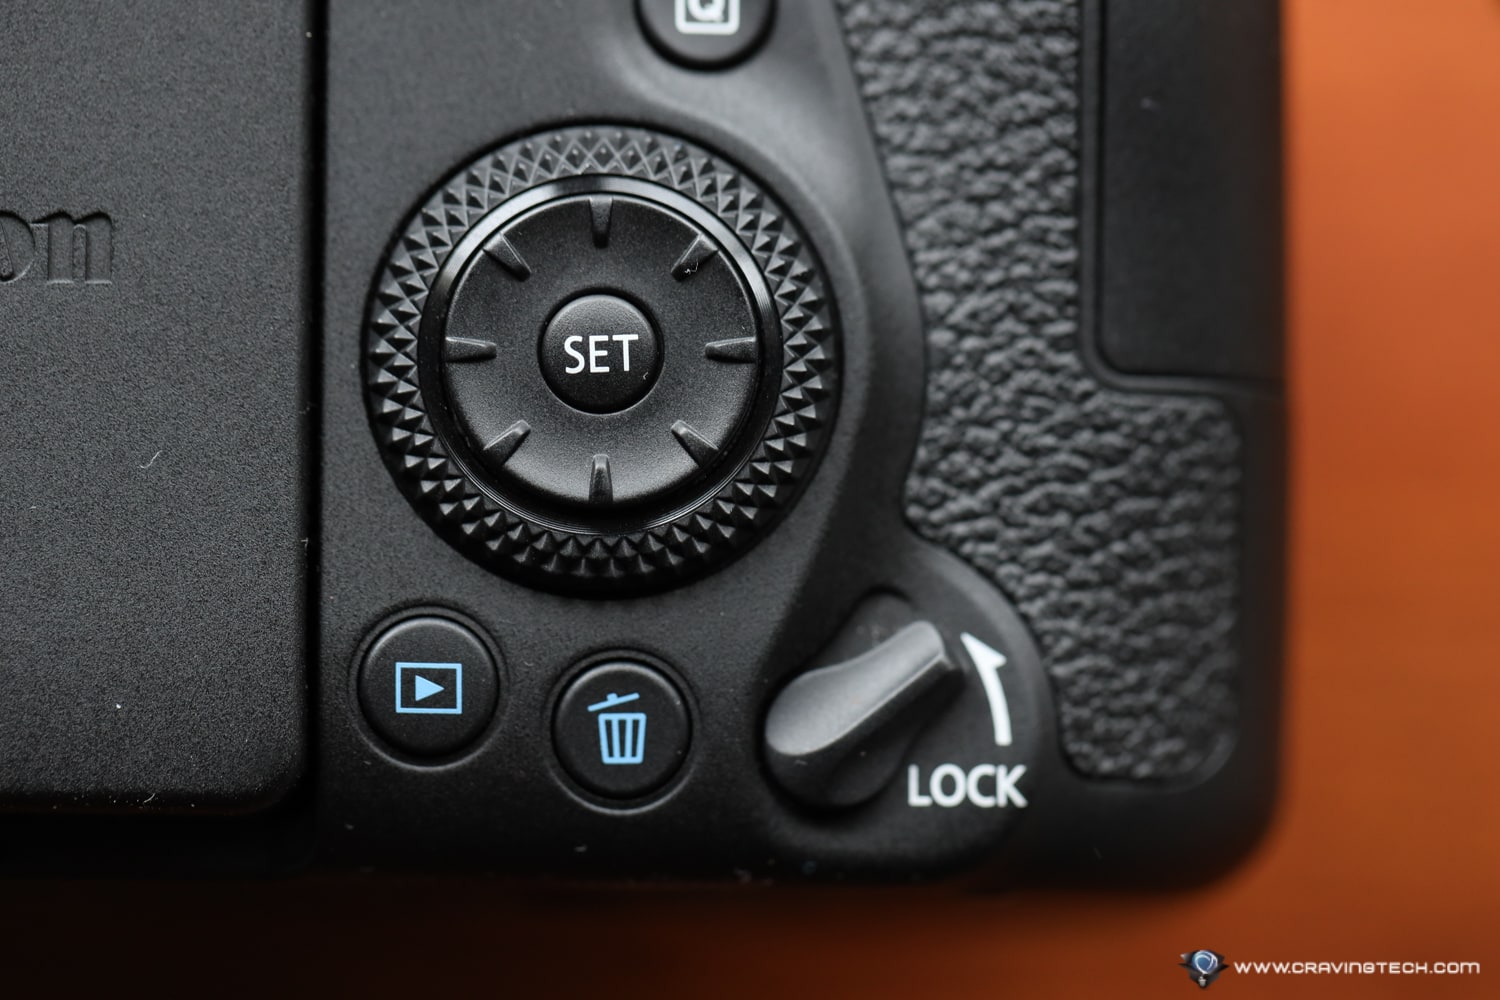 Canon-EOS-90D buttons layout